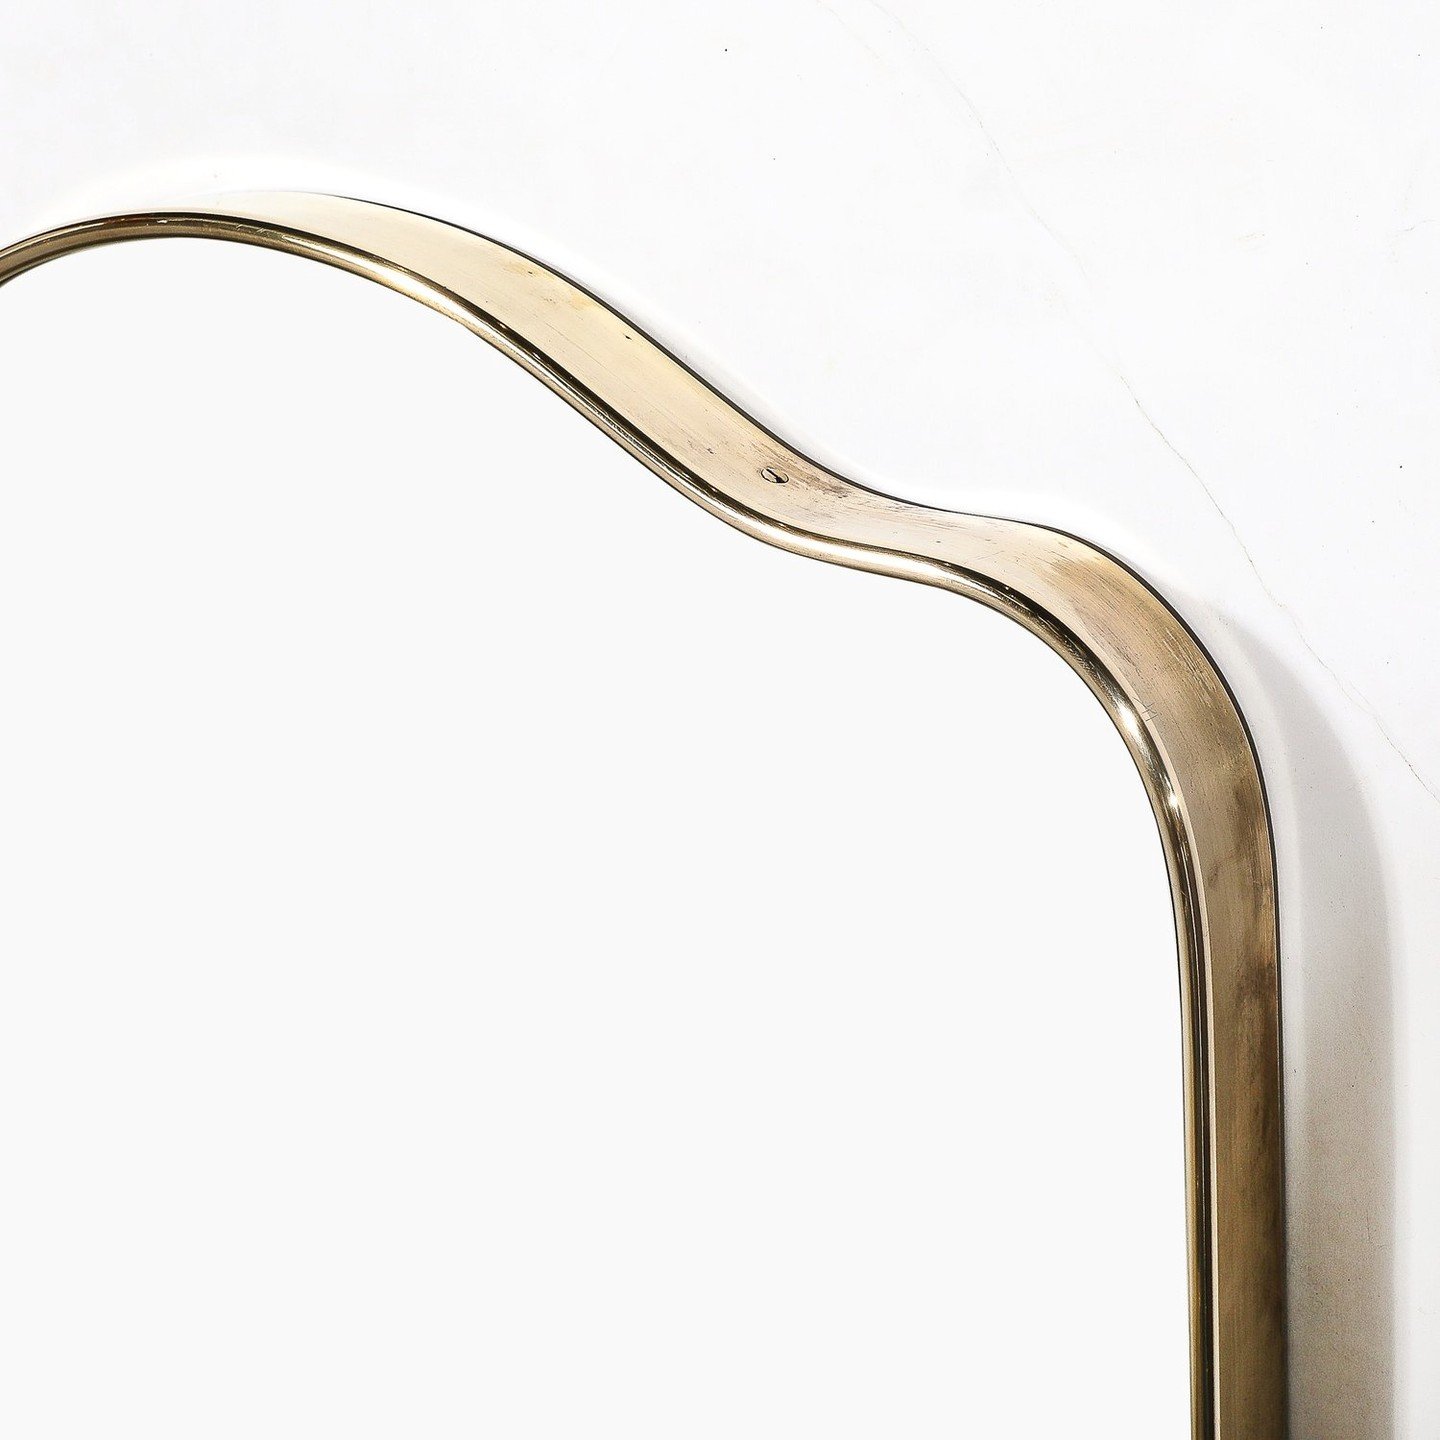 Mid-Century Modernist Vertical Brass Wrapped Mirror With Rounded Arch Detailing

This minimal and beautifully made Mid-Century Modernist Vertical Brass Wrapped Mirror With Rounded Arch Detailing originates from Italy, Circa 1960. Features a stunning 